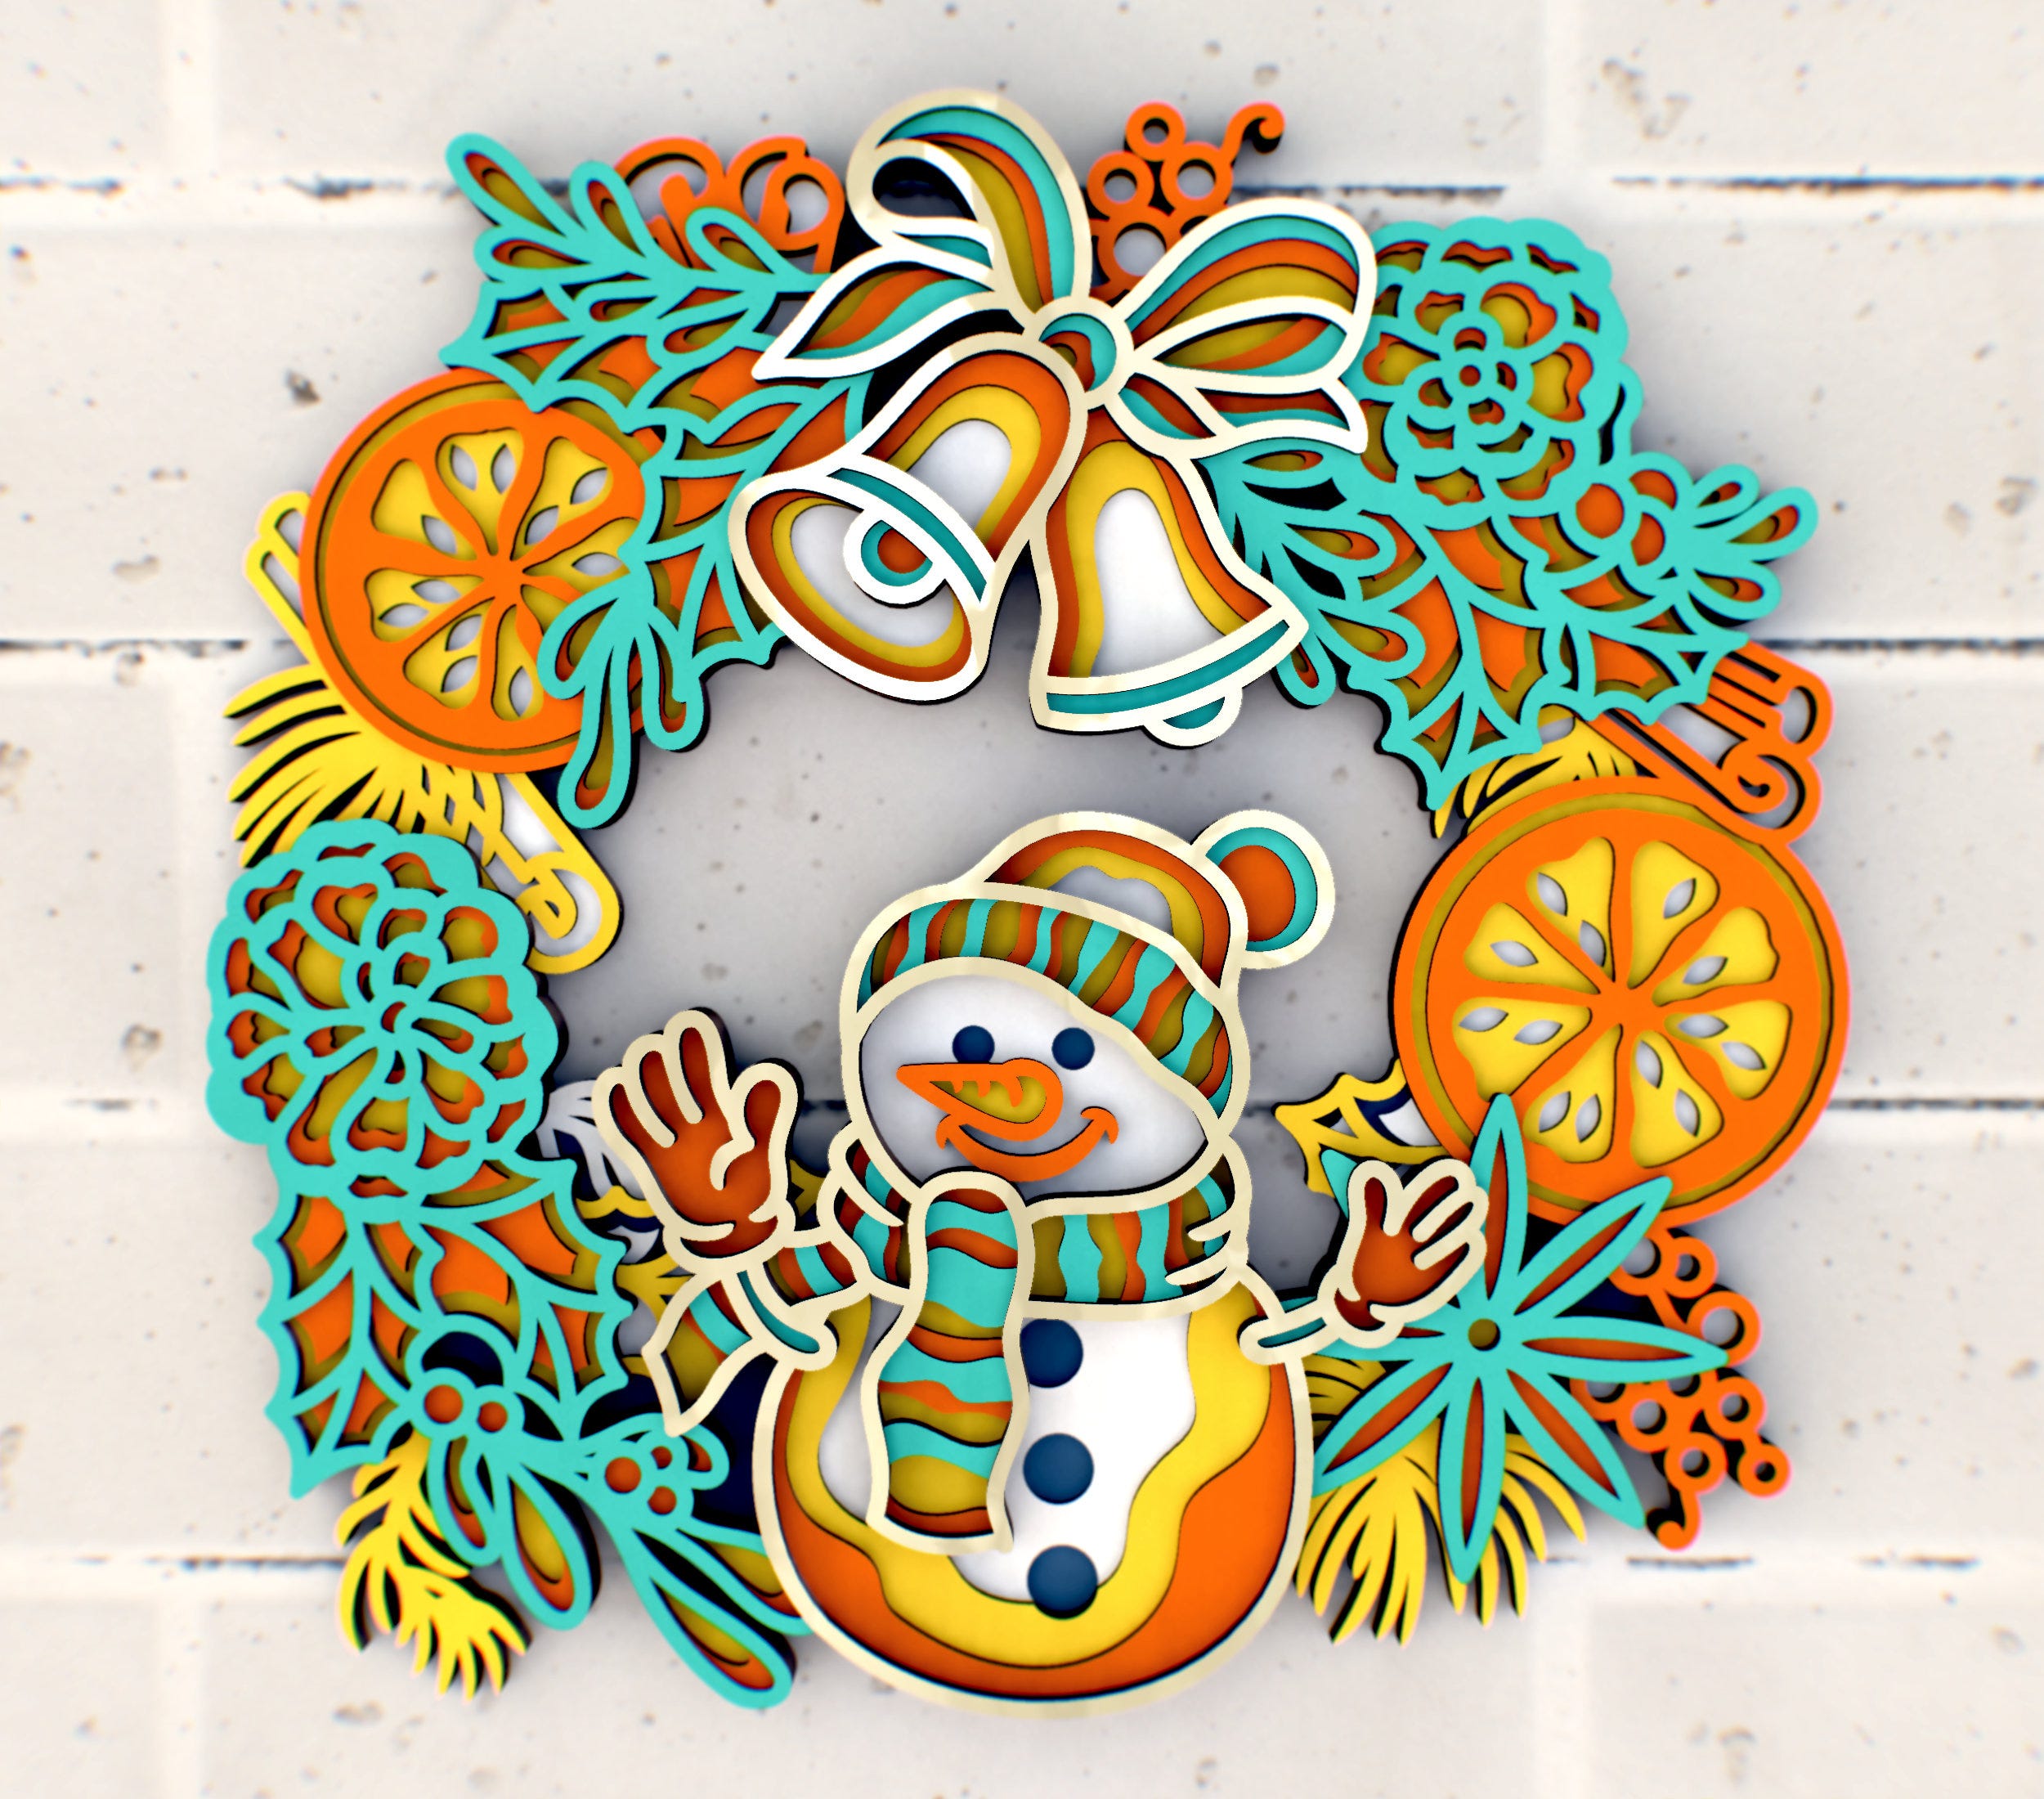 Christmas wreath with snowman 3D Mandala SVG files, New Year Decoration Laser Cutting Plans, Cricut, Glowforge, DXF Templates for CNC router